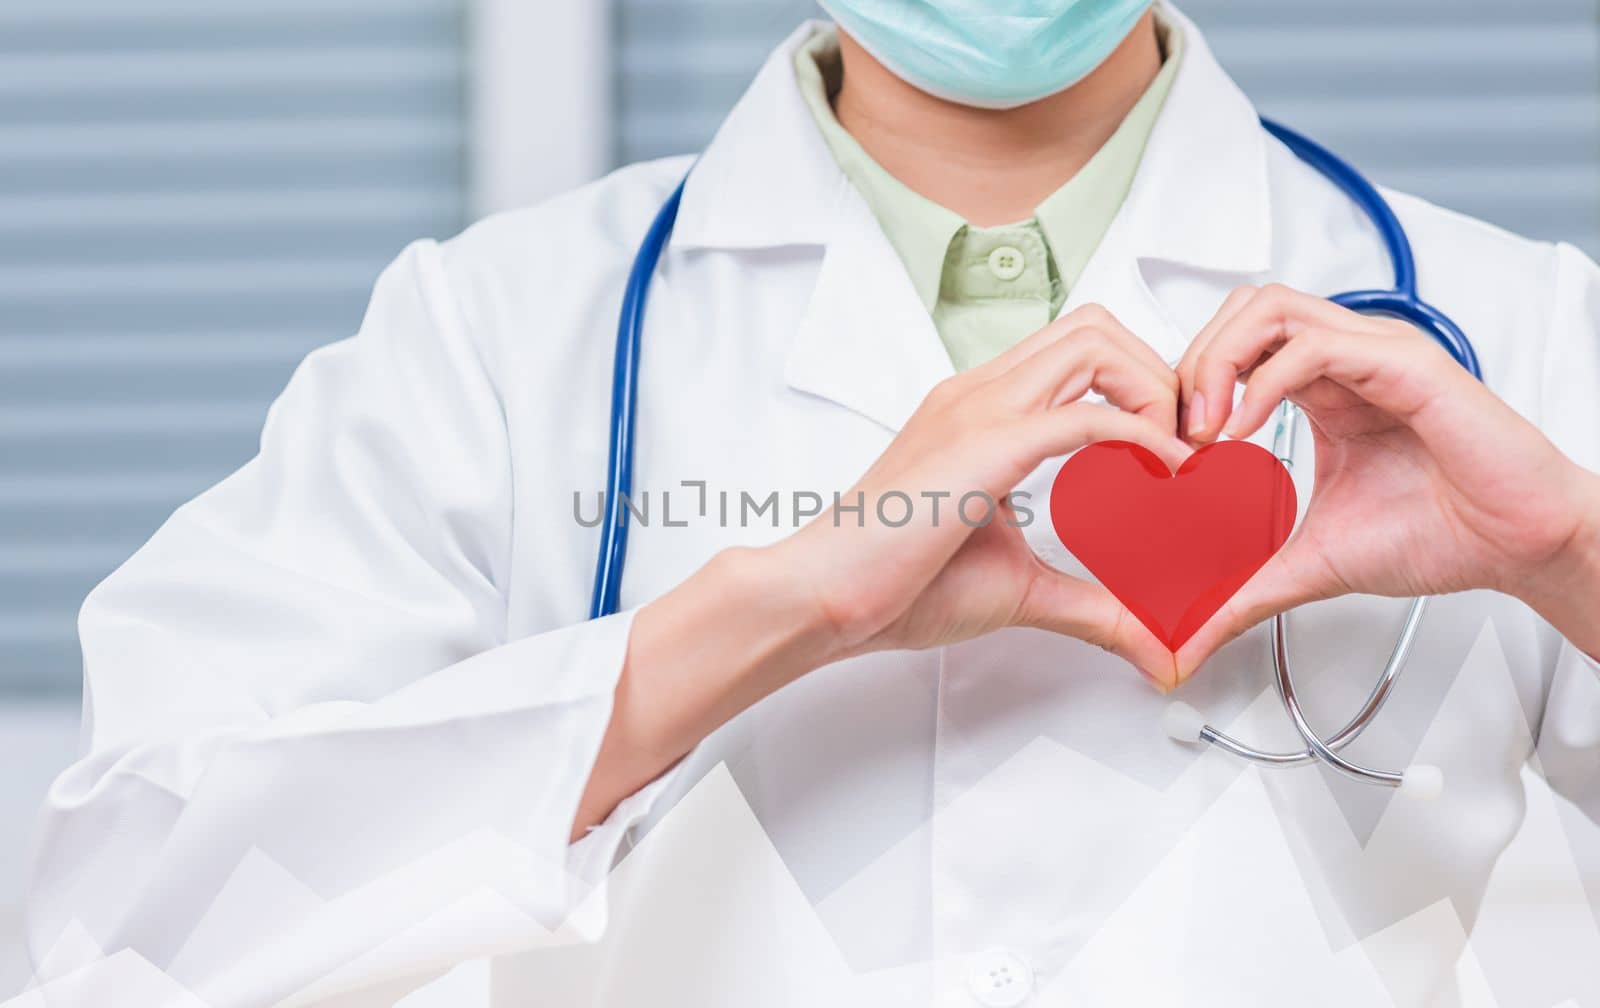 Doctor Day Concept. Doctor woman wearing uniform and stethoscope she making heart finger shape, Doctor's hand sign, Healthy medical heart, treatment of heart diseases by palms